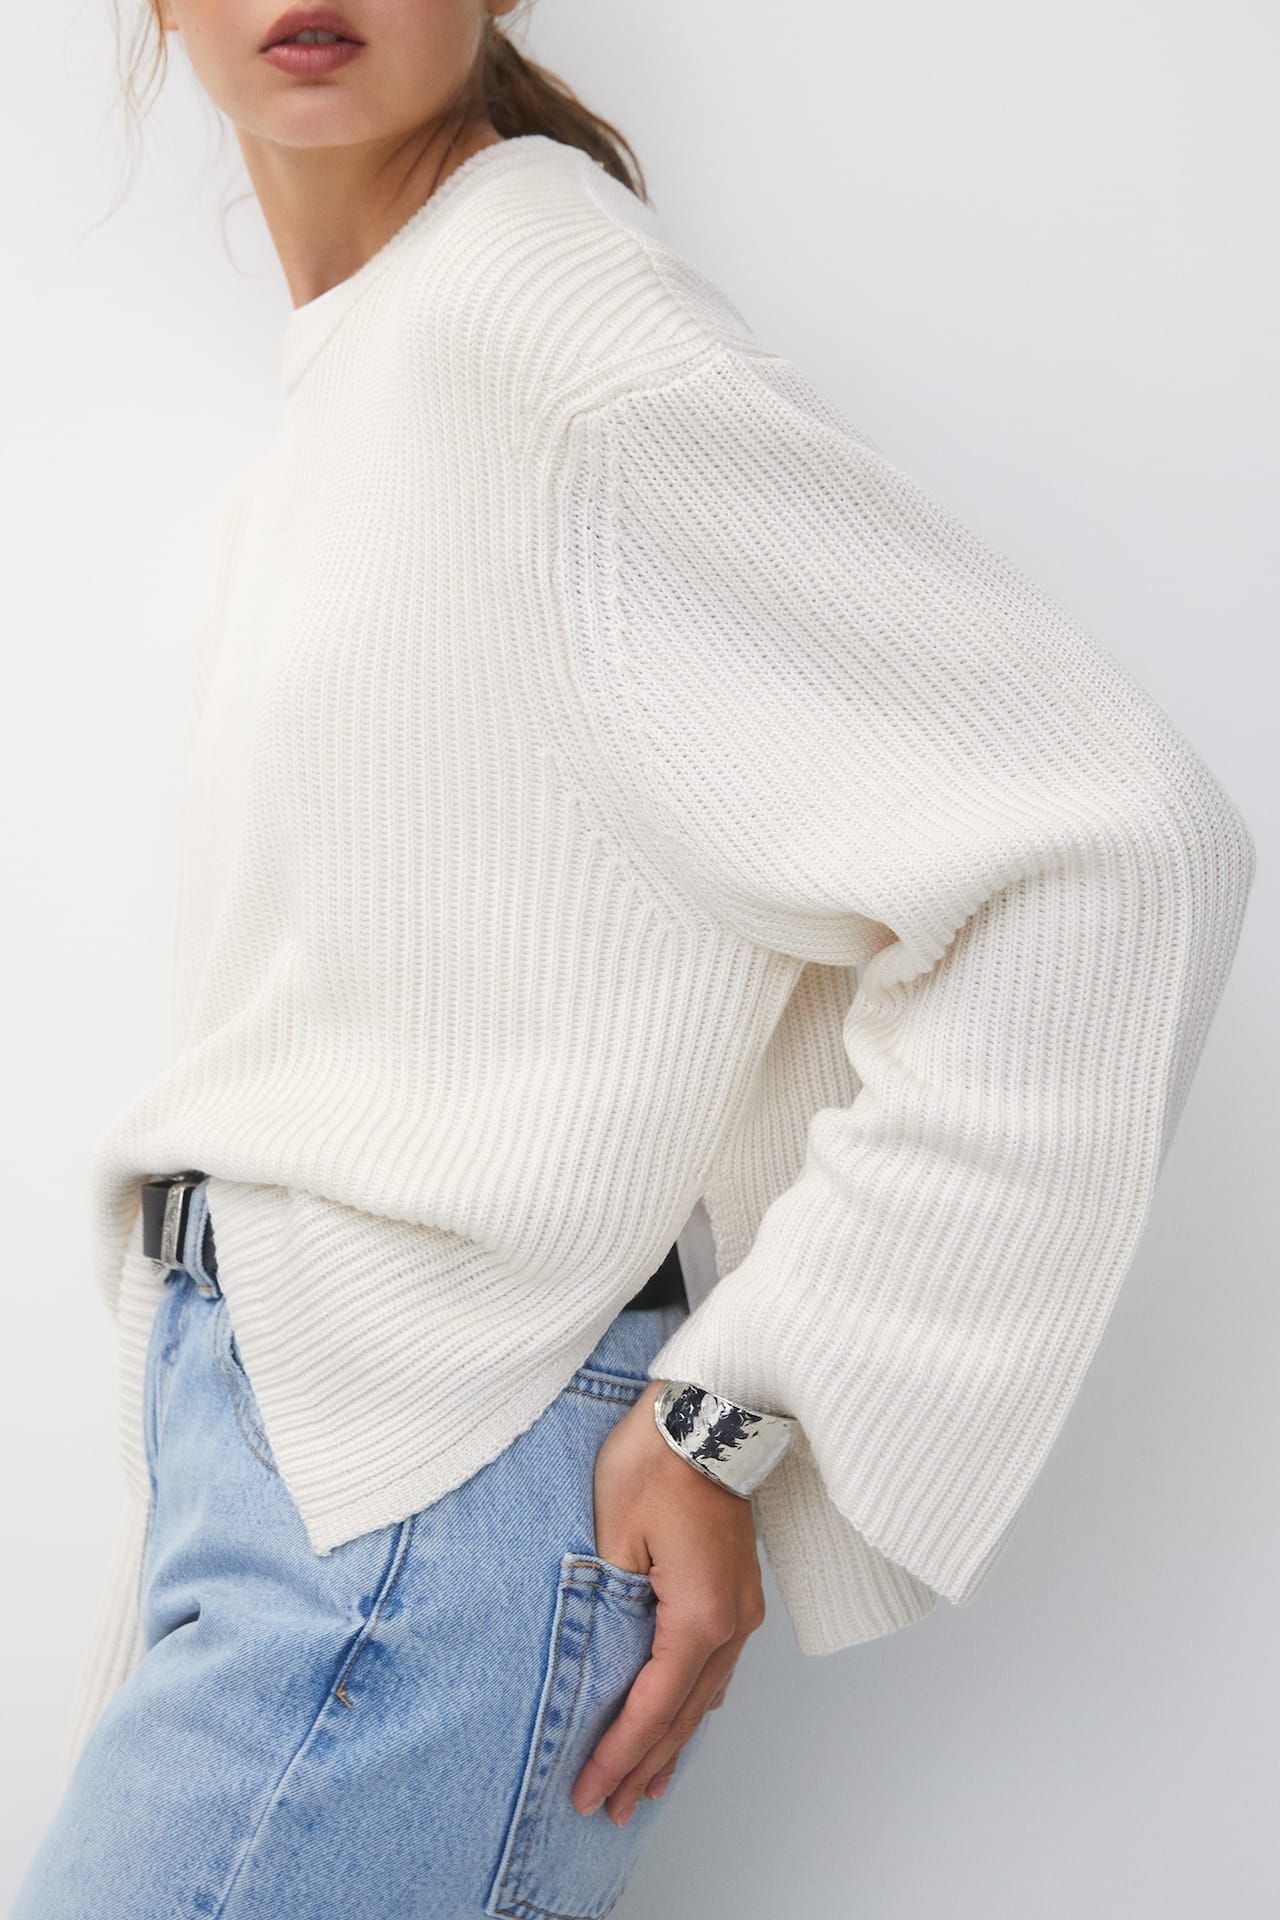 Oversize knit jumper | PULL and BEAR UK